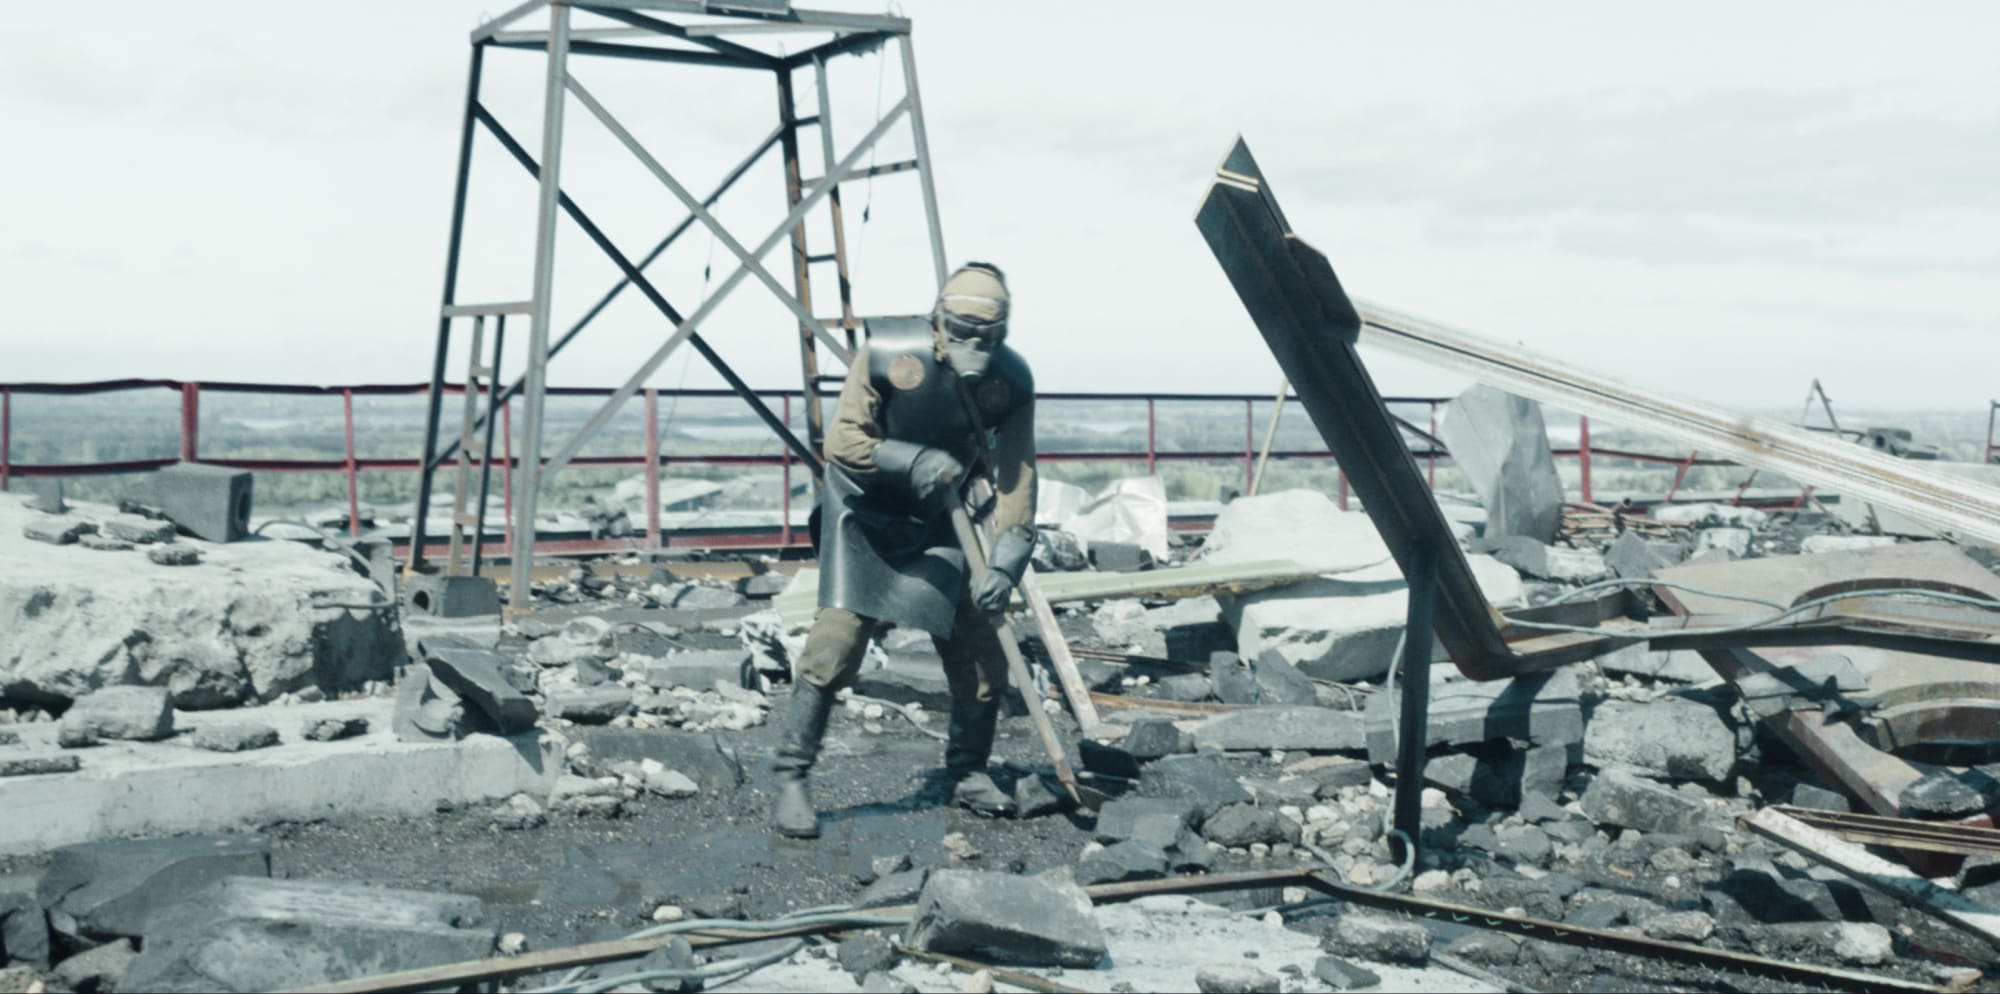 Chernobyl on 4K review What to expect from the bonus features and more